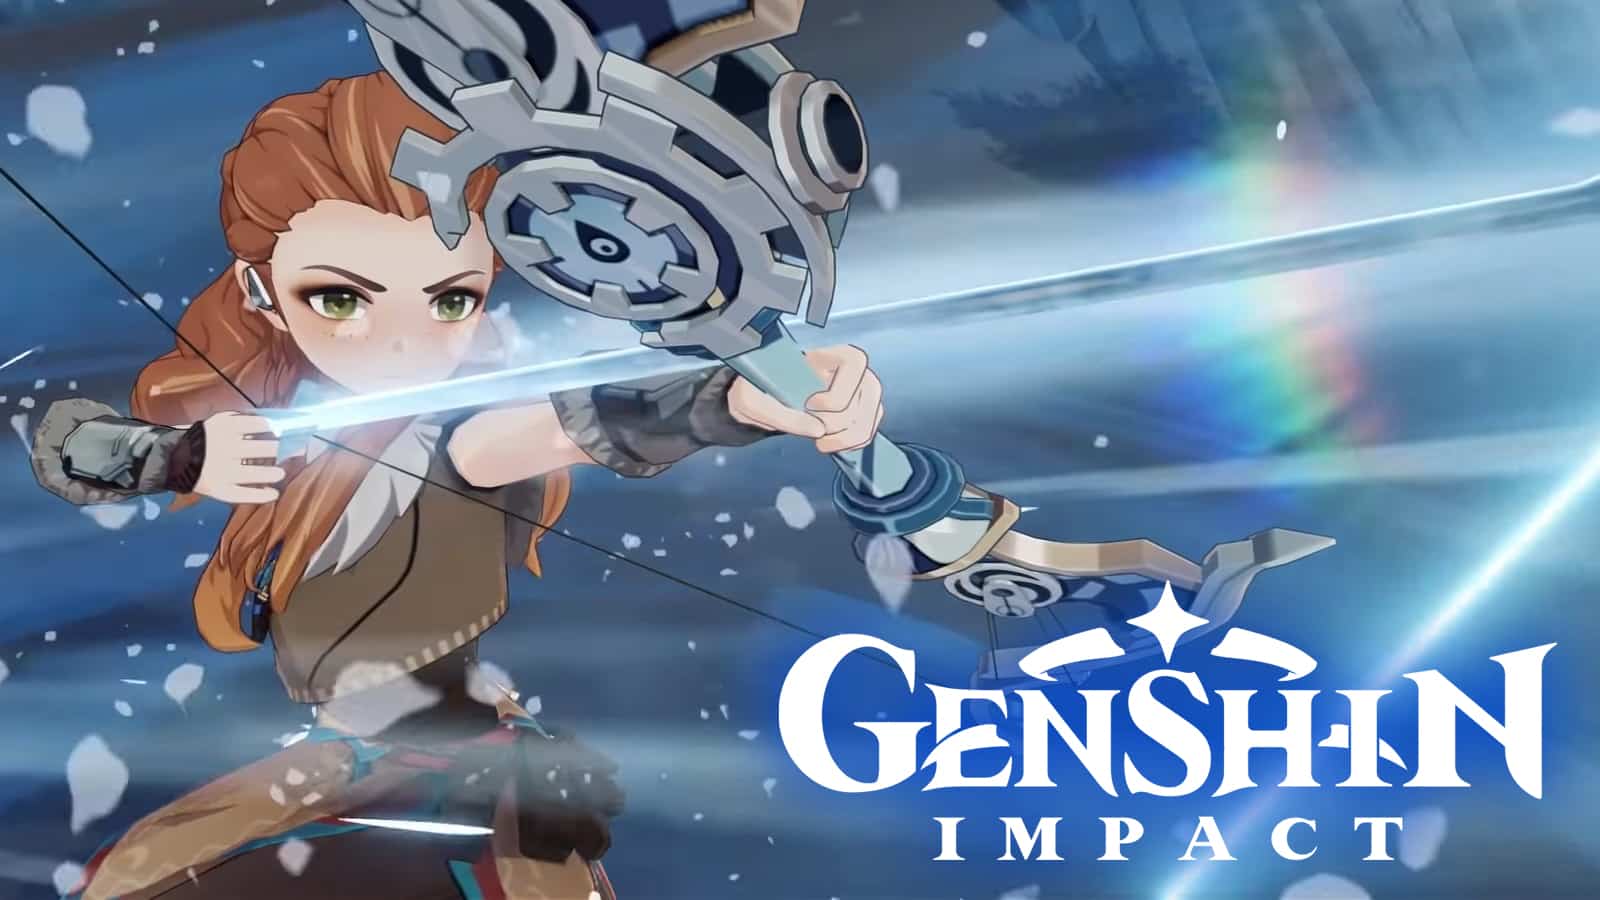 Genshin Impact update 2.1 patch notes: Aloy debut, new Inazuma islands, fishing, more